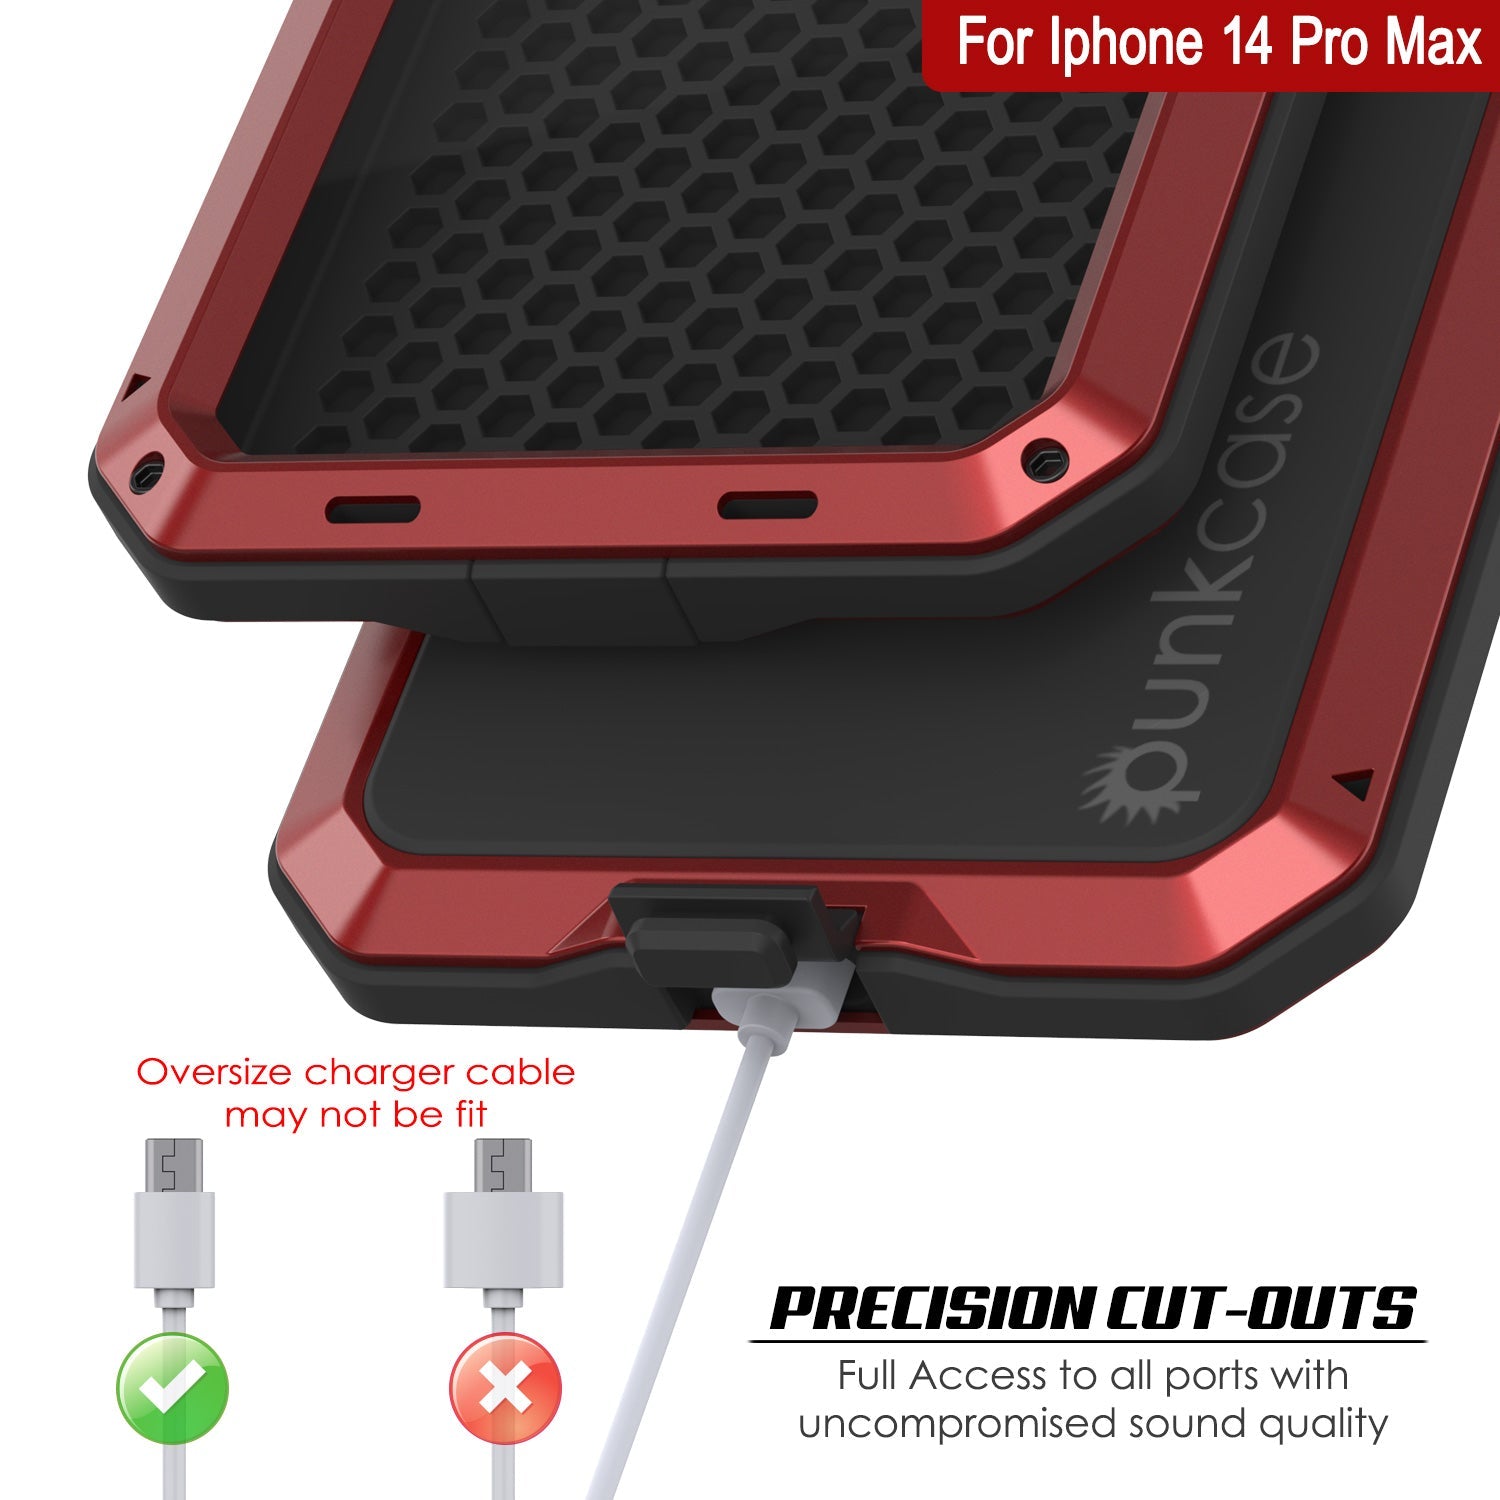 iPhone 14 Pro Max Metal Case, Heavy Duty Military Grade Armor Cover [shock proof] Full Body Hard [Red]